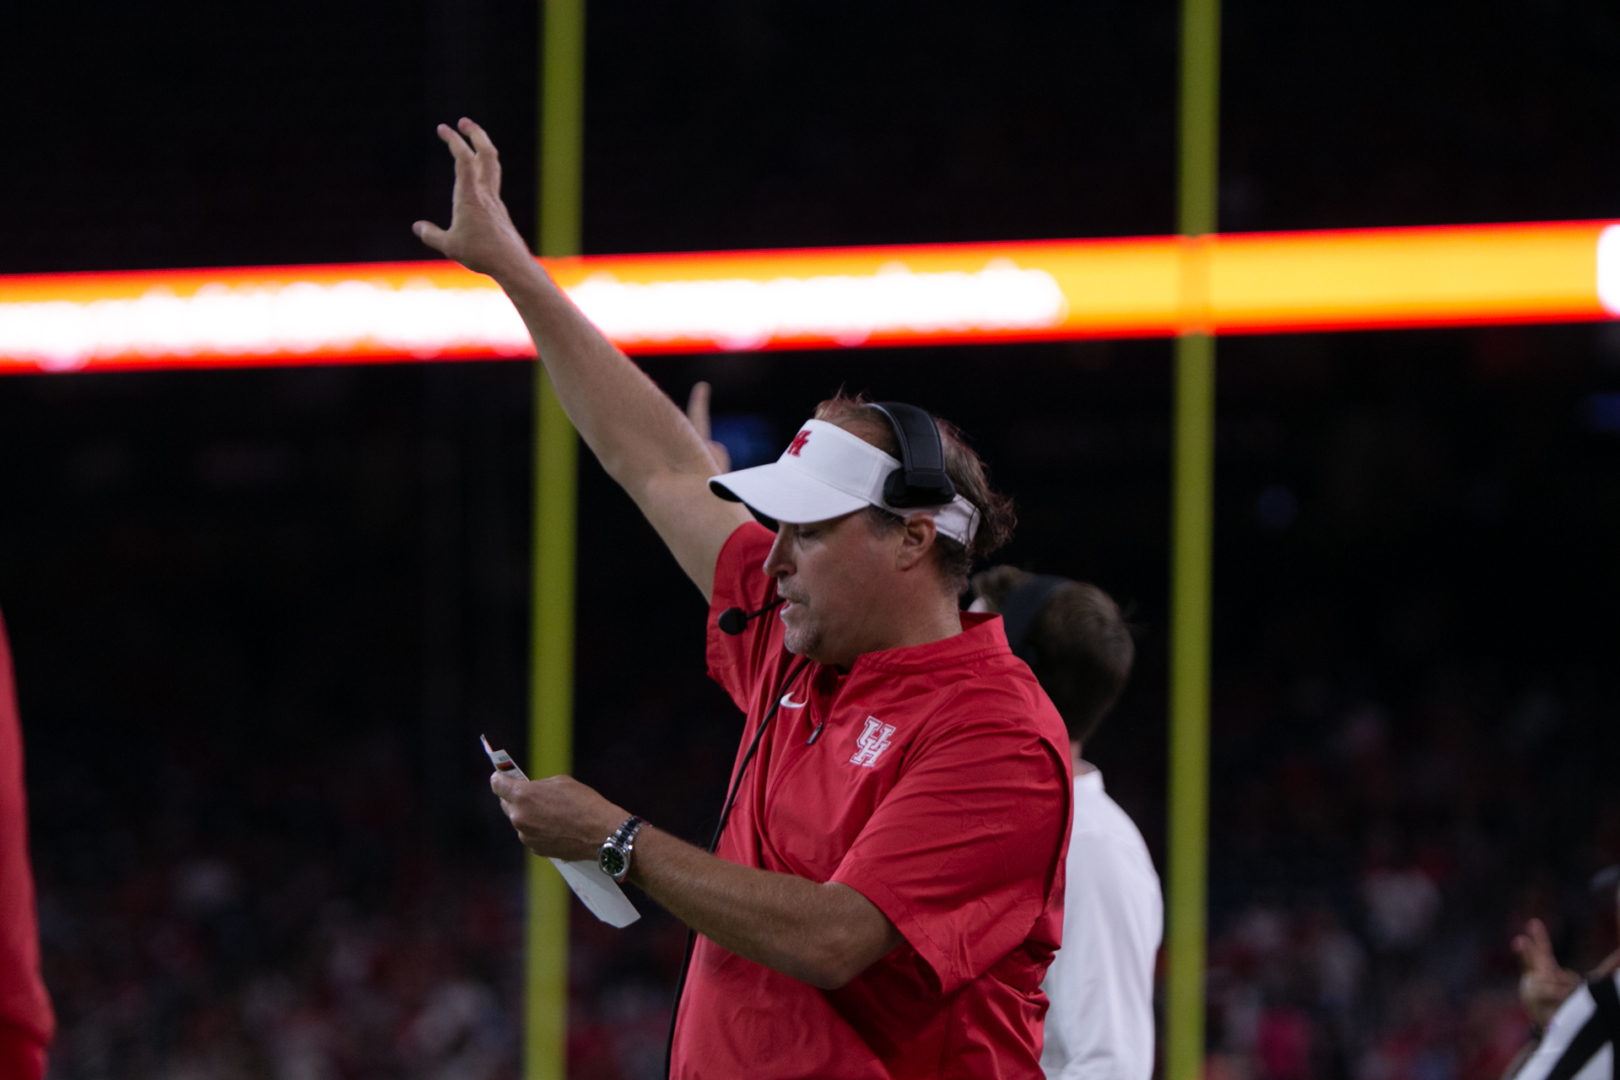 Following their 24-14 win against Tulsa, head coach Dana Holgorsen remarked that turnovers were a big part of Houston's success. He believes they did what they had to do both offensively and defensively, which is was they were missing in their loss against Memphis. | Kathryn Lenihan/The Cougar